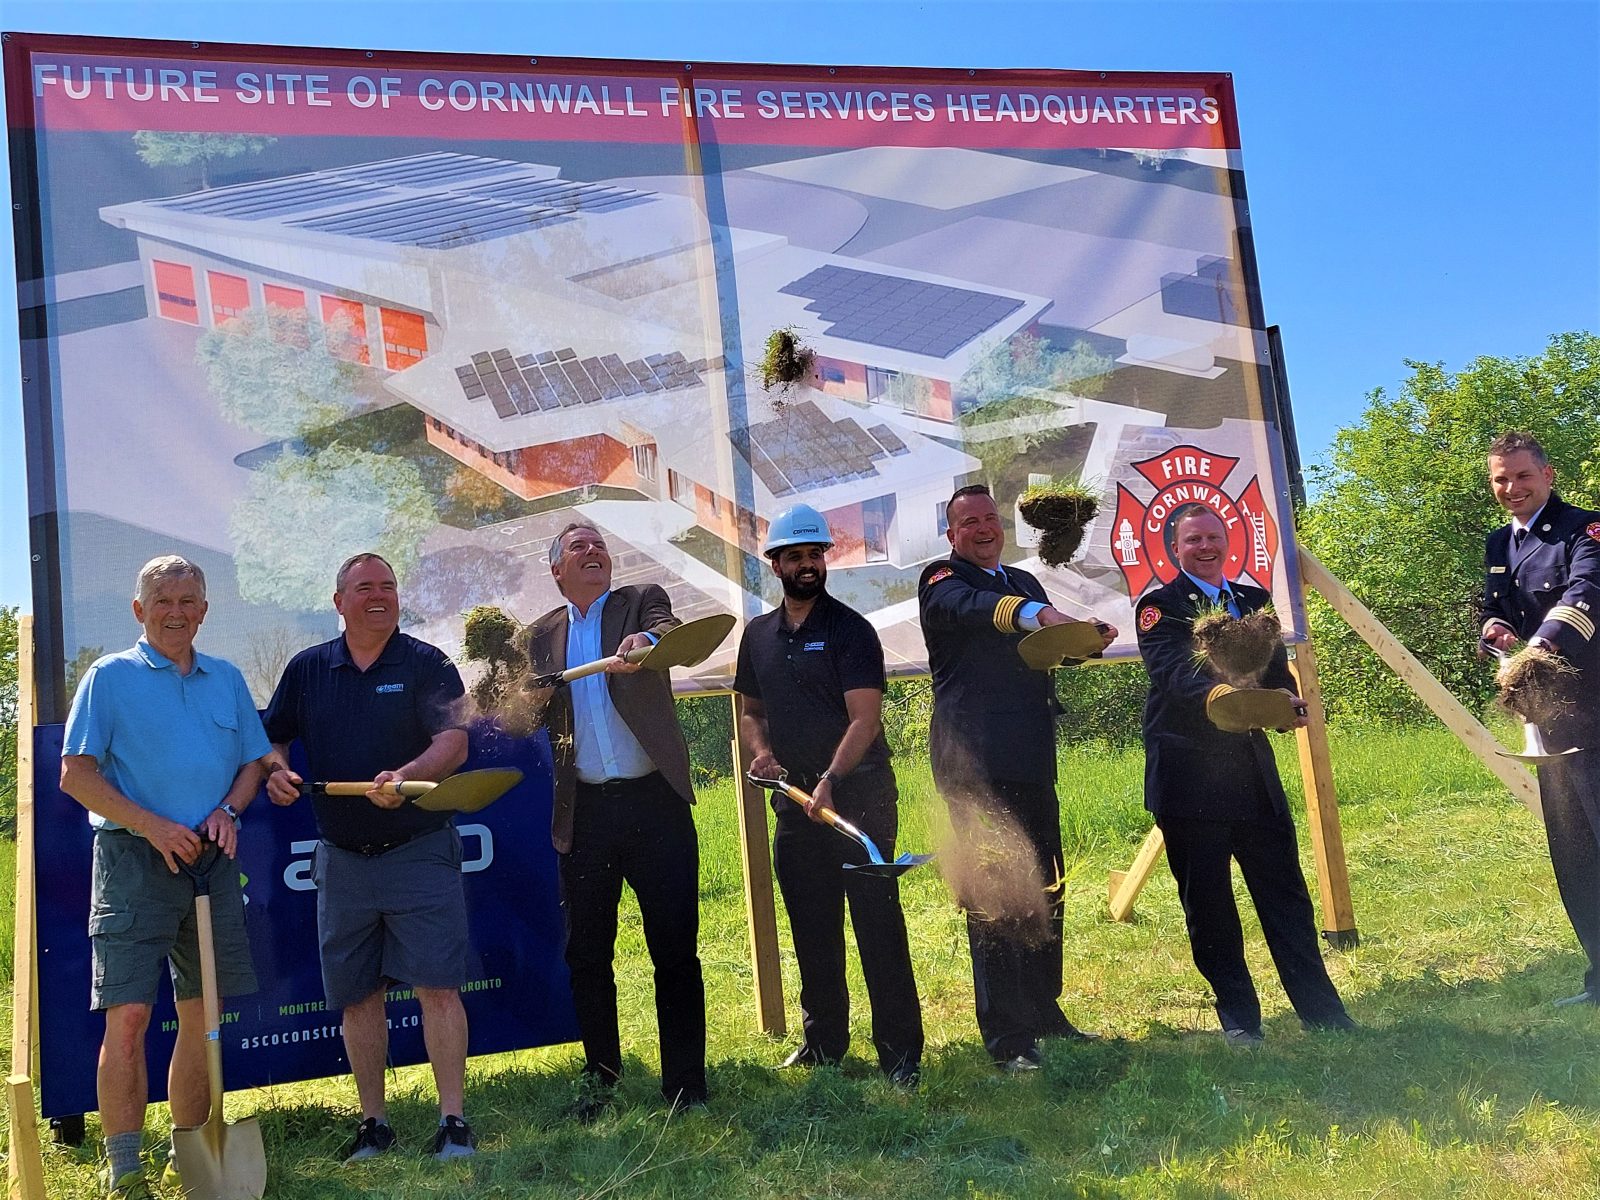 Future Cornwall Fire Station Headquarters and Training Centre breaks ground